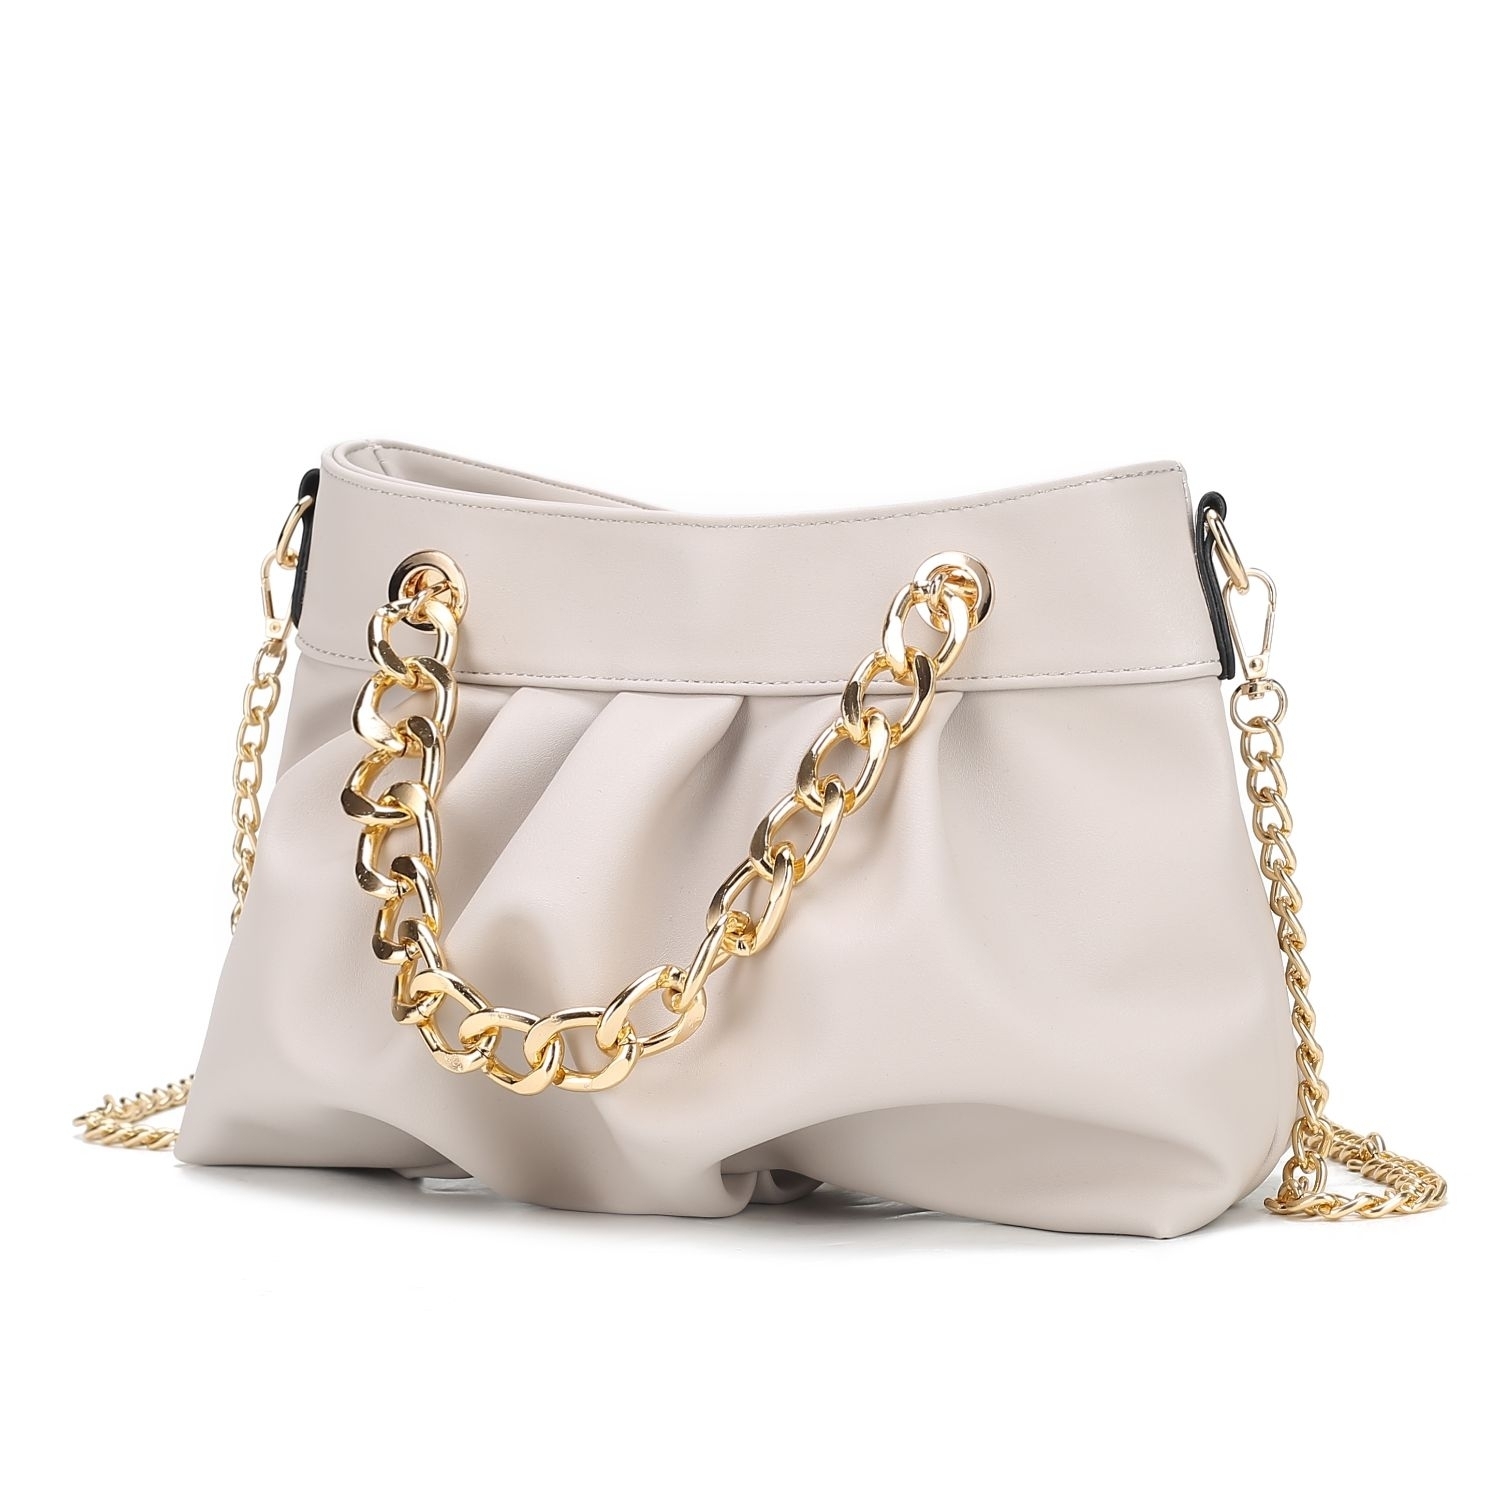 MKF Collection Marvila Minimalist Vegan Leather Chain Ruched Shoulder Bag By Mia K - Chocolate